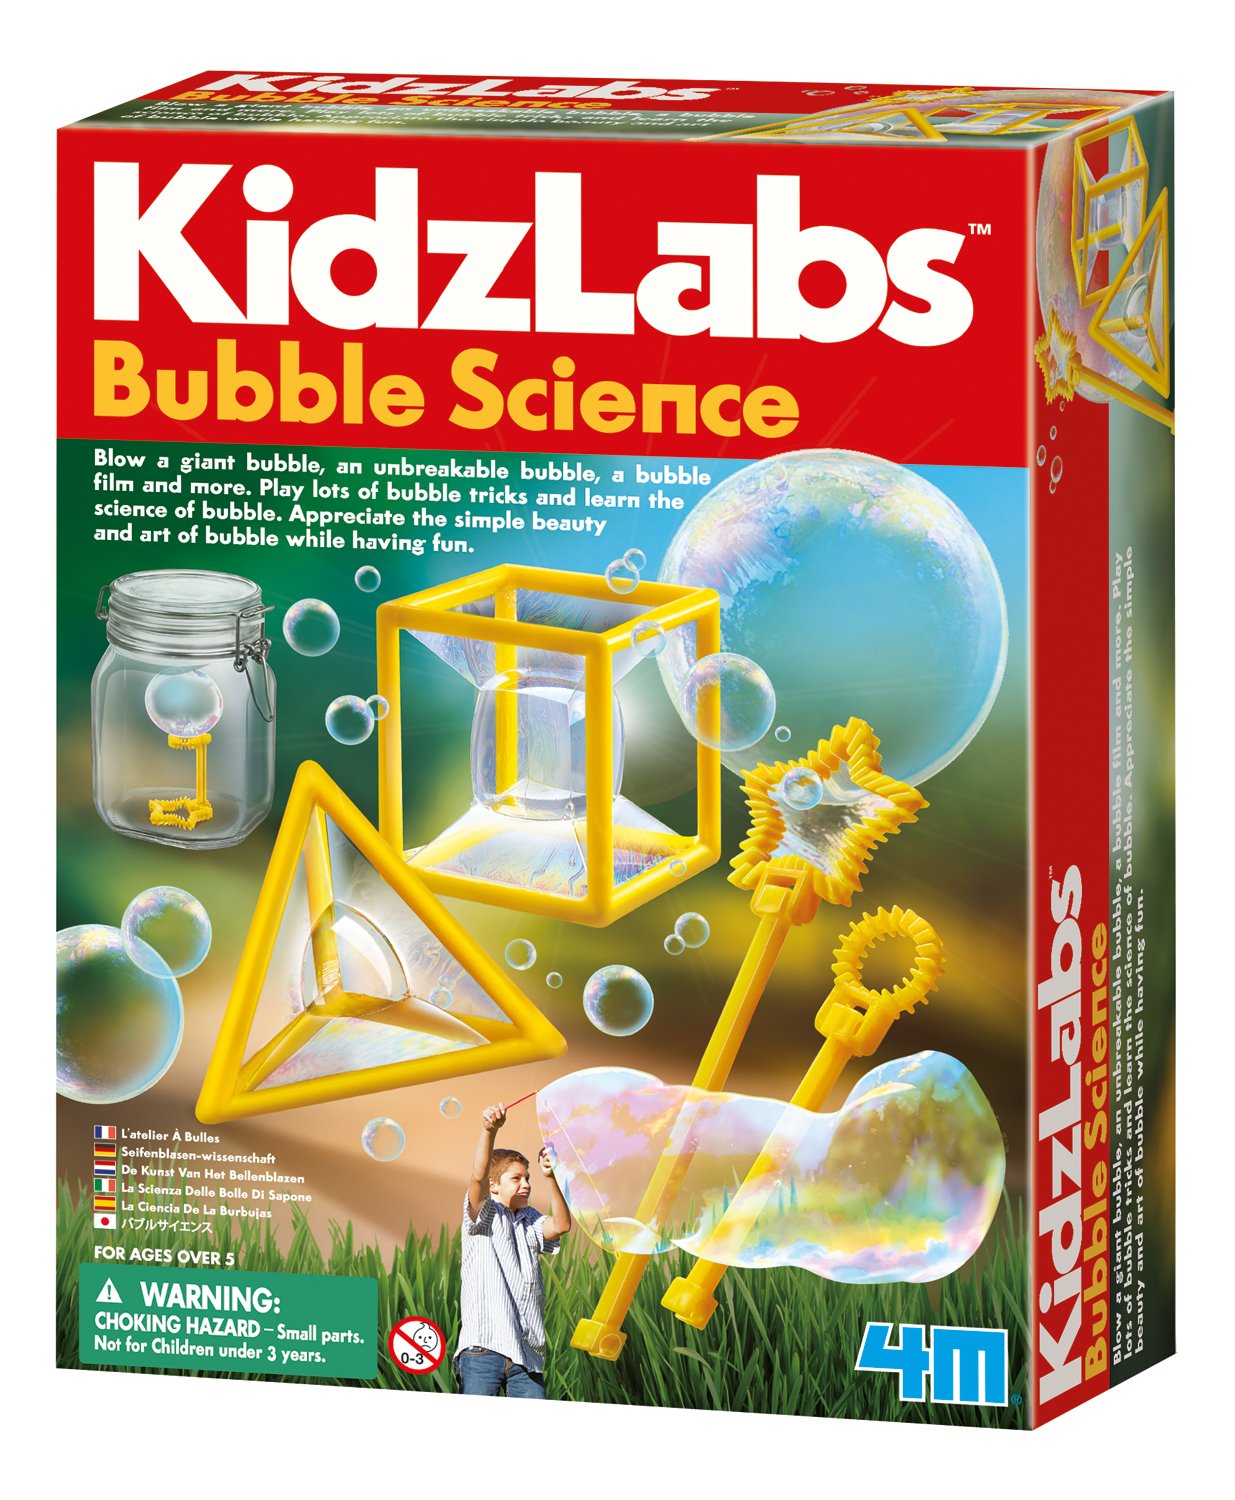 The Bubble Science Kit packaging by KidzLabs.